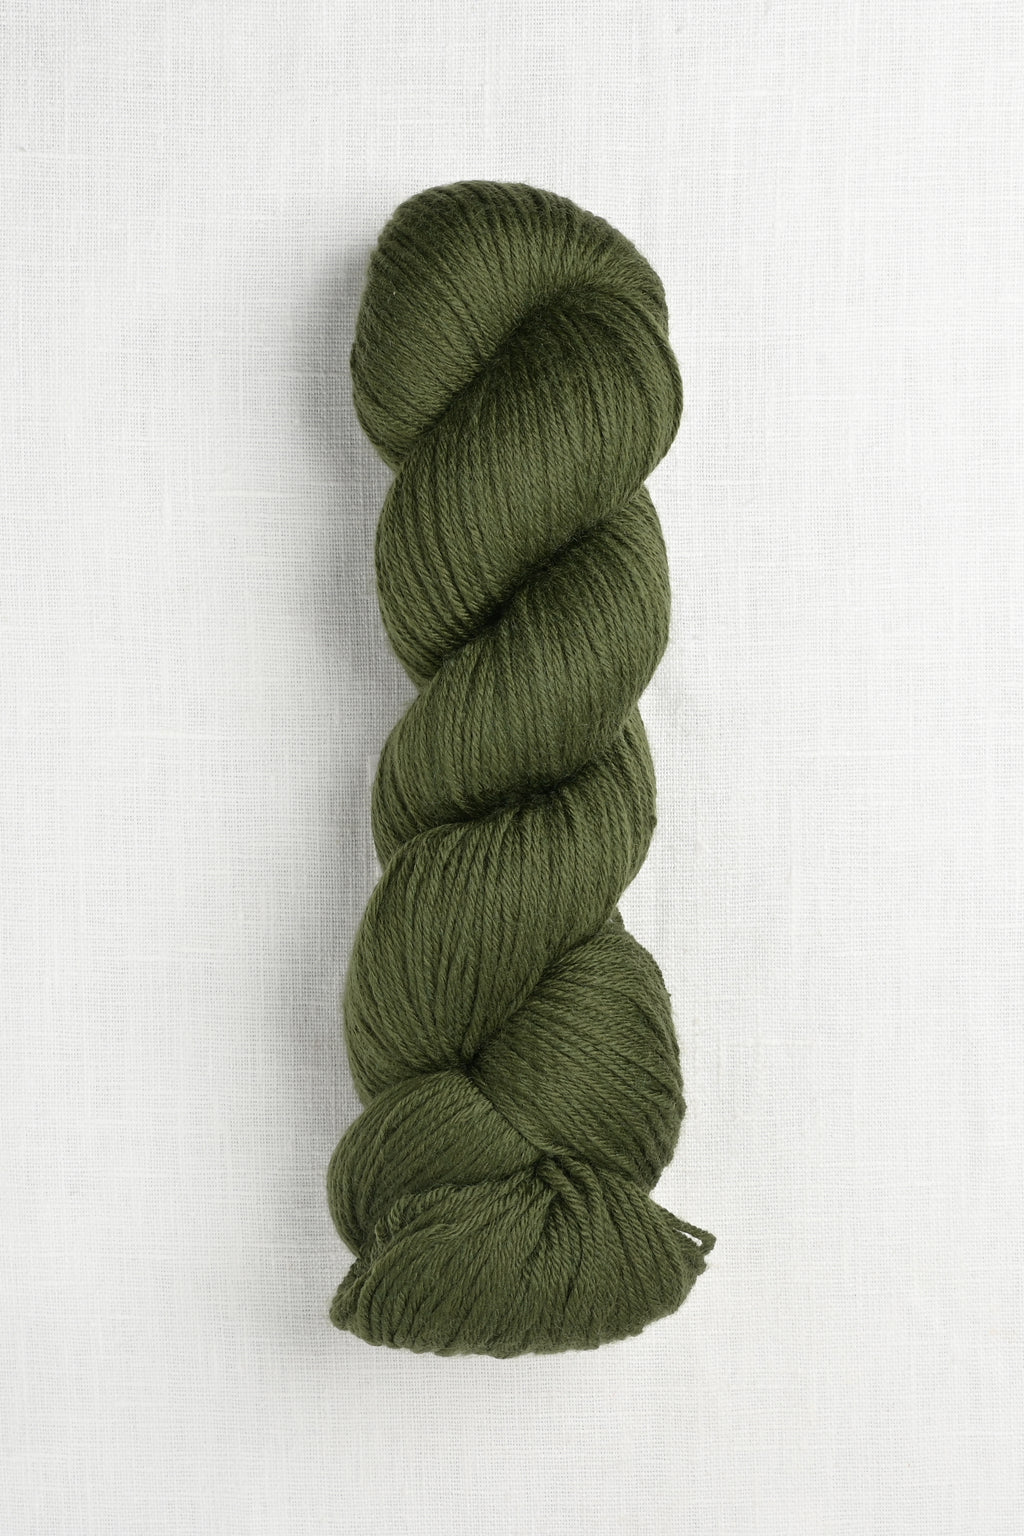 5634 Rock 6 – Company Cascade and Mossy Wool Heritage